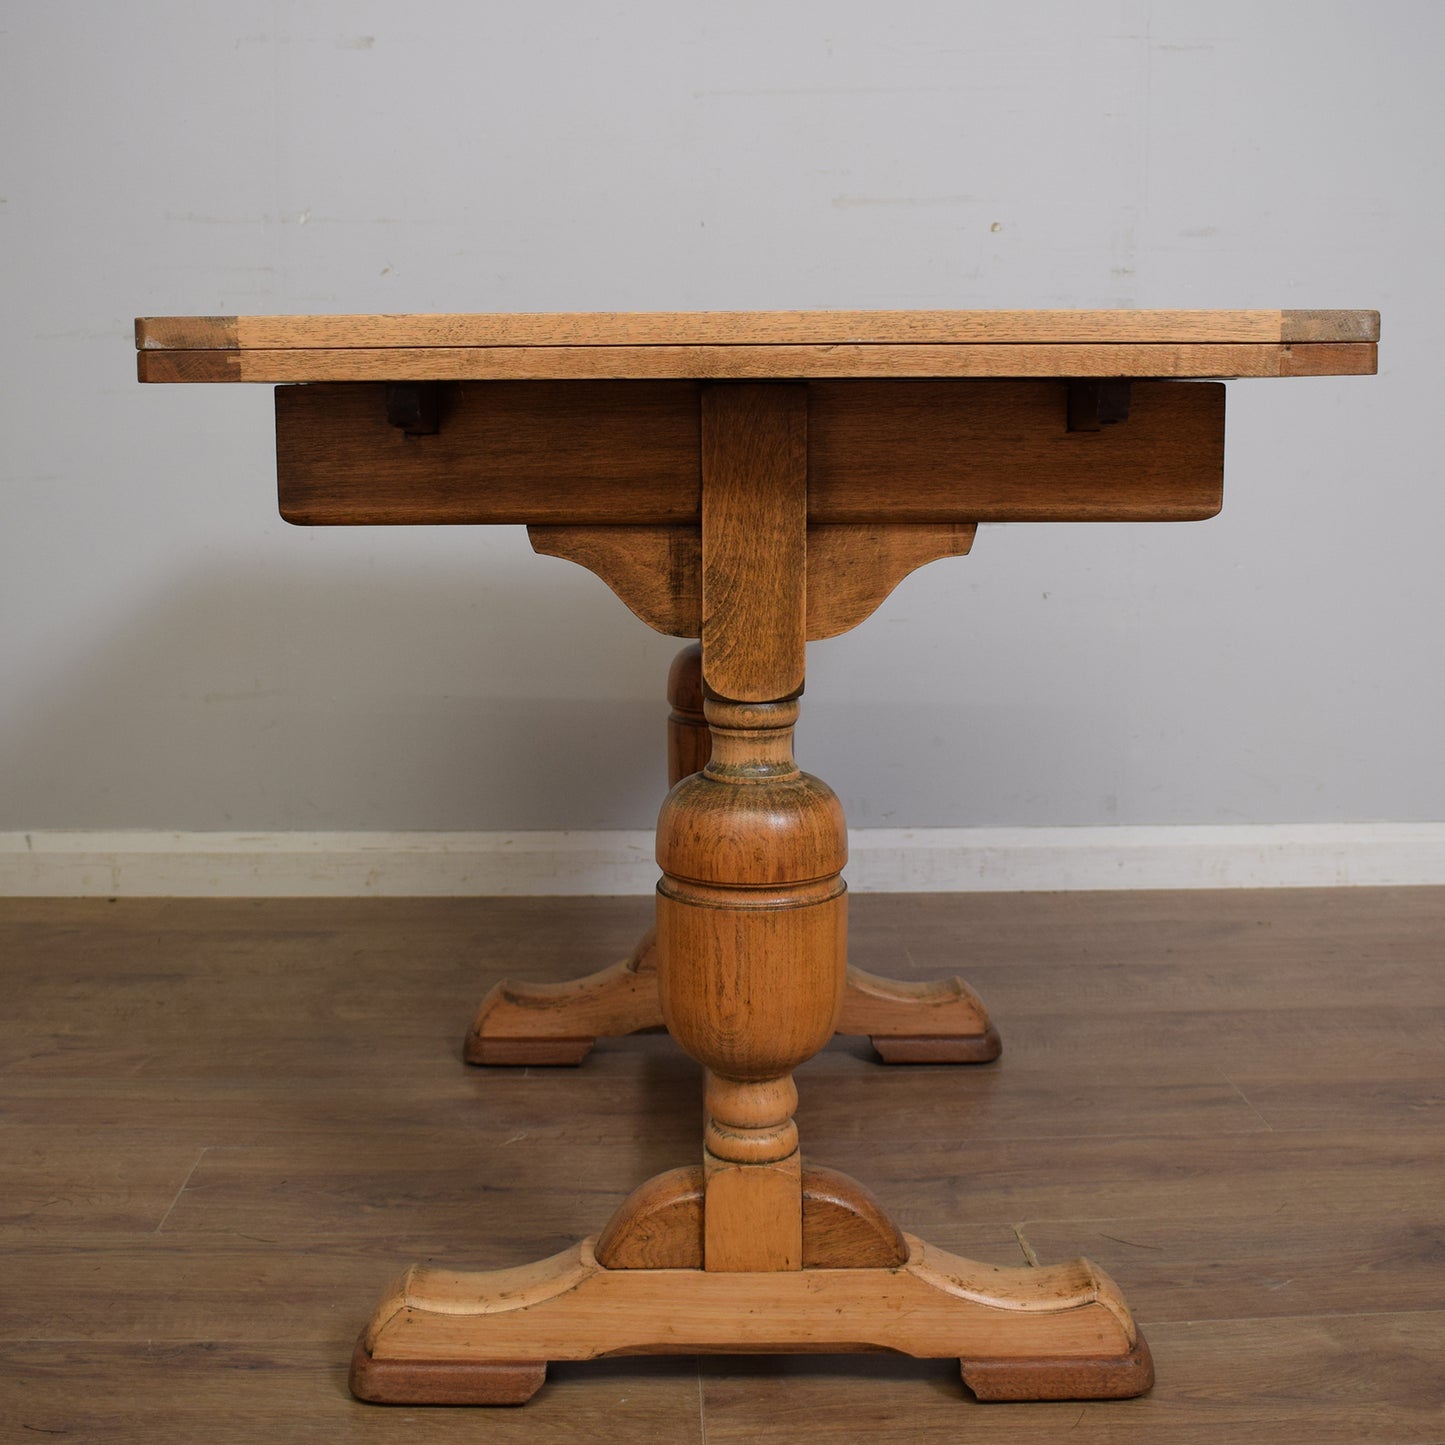 Extending Draw Leaf Table & Four Chairs